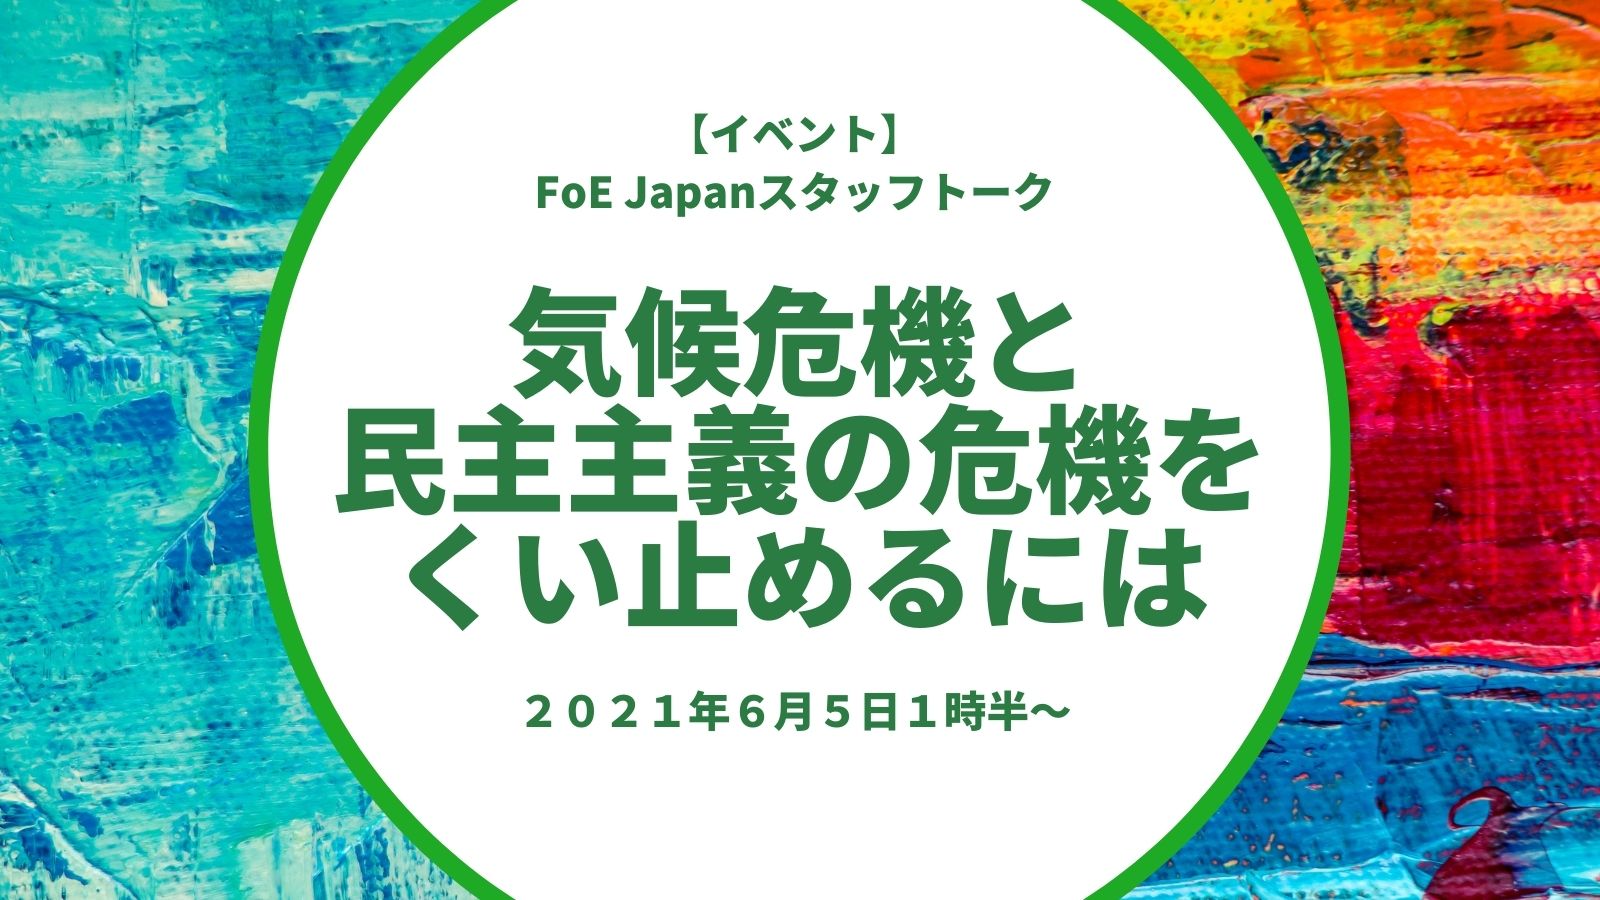 FoE Japan Staff Talk: “How to Stop the Climate Crisis and the Crisis of Democracy